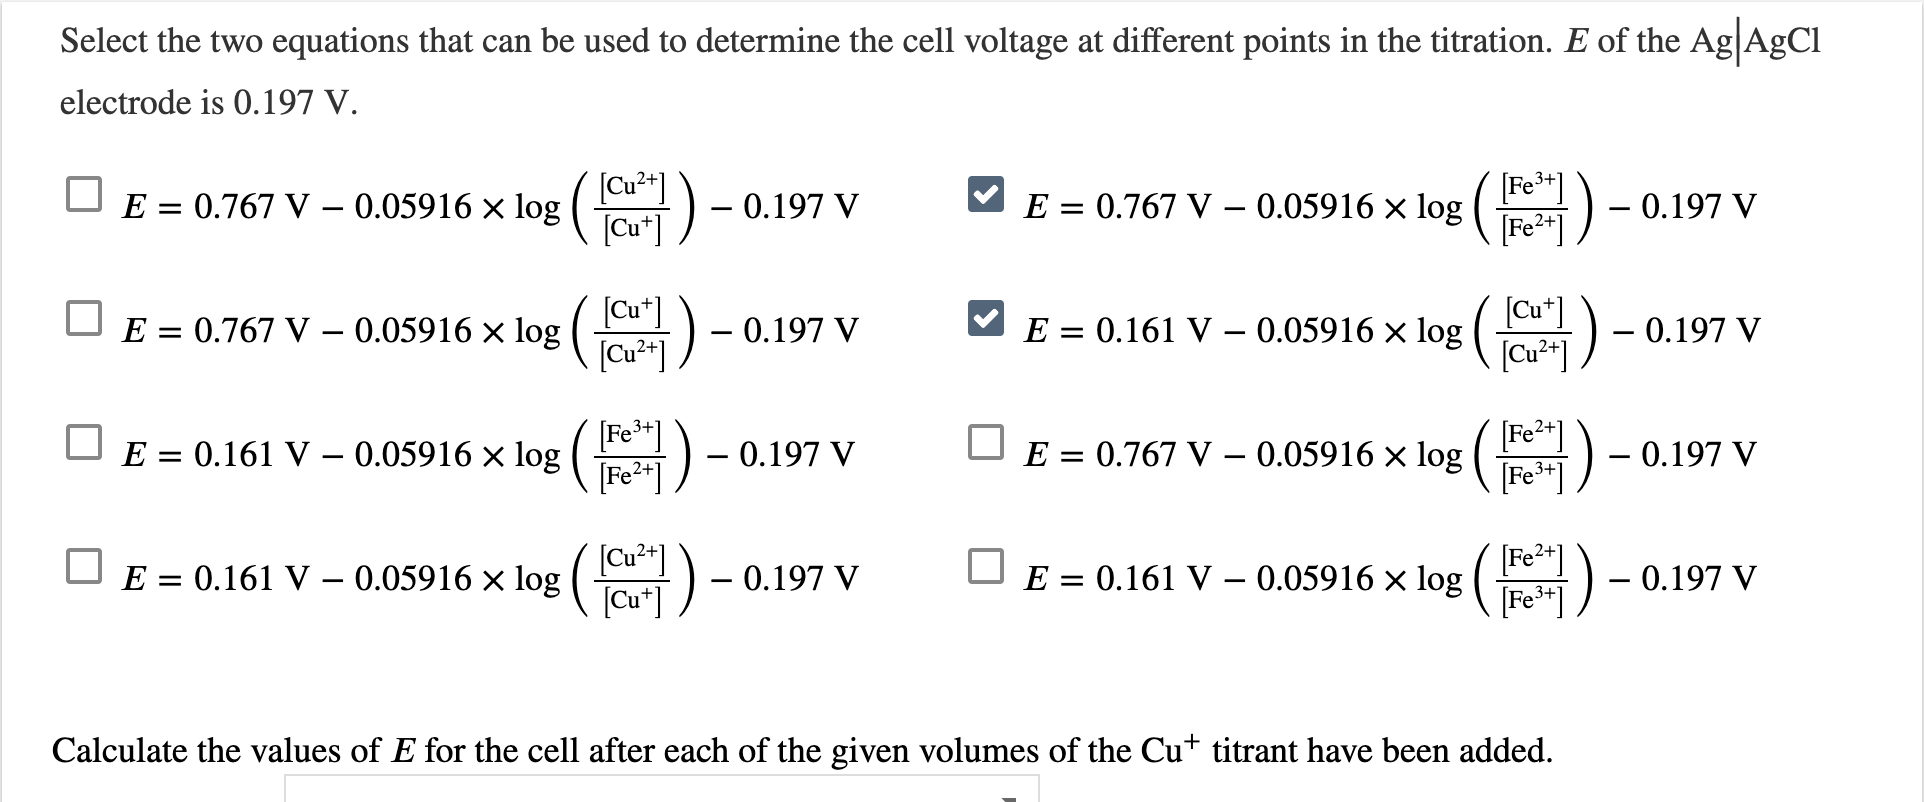 Select the two equations that can be used to determine the cell voltage at different points in the titration. E of the Ag AgCl
electrode is 0.197 V.
E = 0.767 V – 0.05916 x log ()
[Cu²*]
[Cu*]
[Fe*]
E = 0.767 V – 0.05916 × log (
[Fe²*]
- 0.197 V
- 0.197 V
2+]
[Cu*]
E = 0.767 V – 0.05916 × log ( ) -
[Cu²*]
[Cu*]
E = 0.161 V – 0.05916 × log (ar21
-) - 0.197 V
0.197 V
E = 0.161 V – 0.05916 × log( Fe
[Fe2*]
[Fe2+]
E = 0.767 V – 0.05916 × log ( r -
Fe+]
-0.197 V
- 0.197 V
[Cu²*]
E = 0.161 V – 0.05916 × log (
(Cu*]
[Fe2+]
E = 0.161 V – 0.05916 × log ( i) -
[Fe**]
0.197 V
0.197 V
Calculate the values of E for the cell after each of the given volumes of the Cut titrant have been added.
